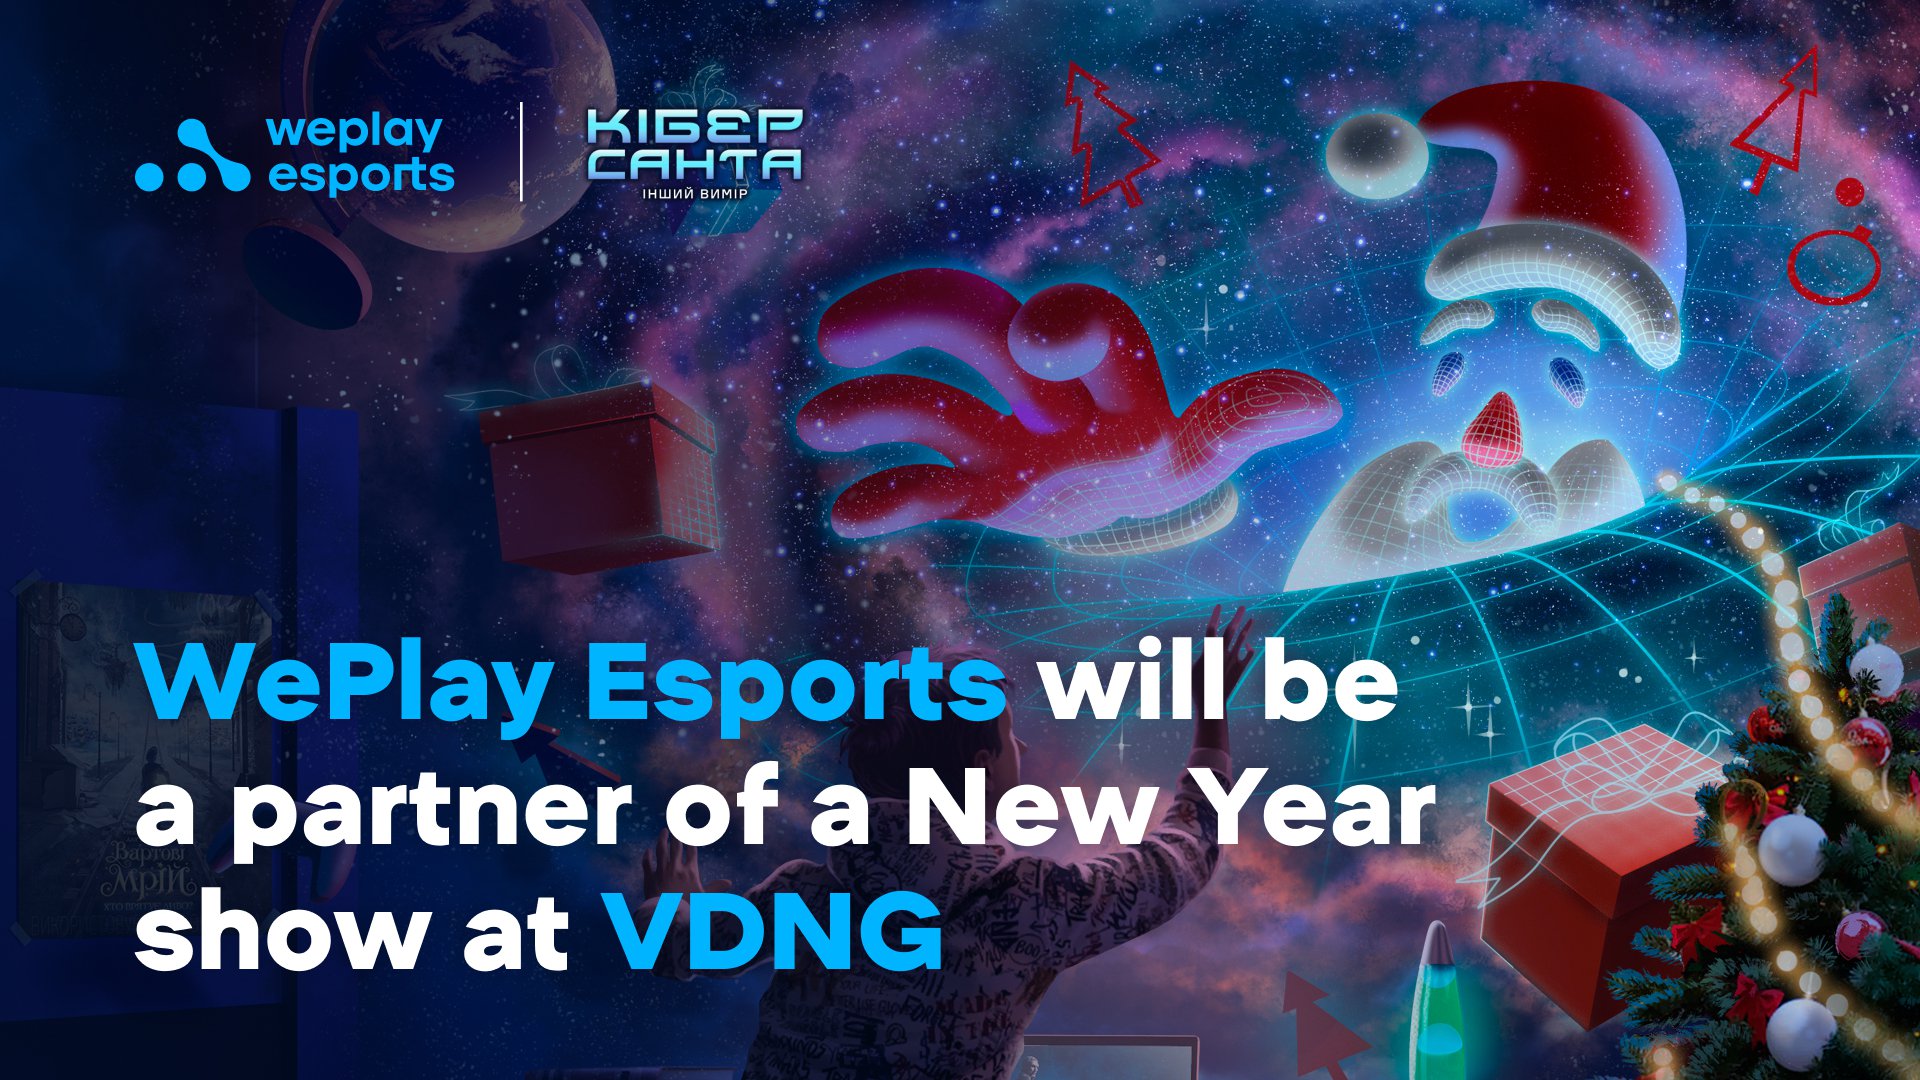 WePlay Esports invites you to the New Year's show "Cyber Santa. Another dimension" at the VDNG